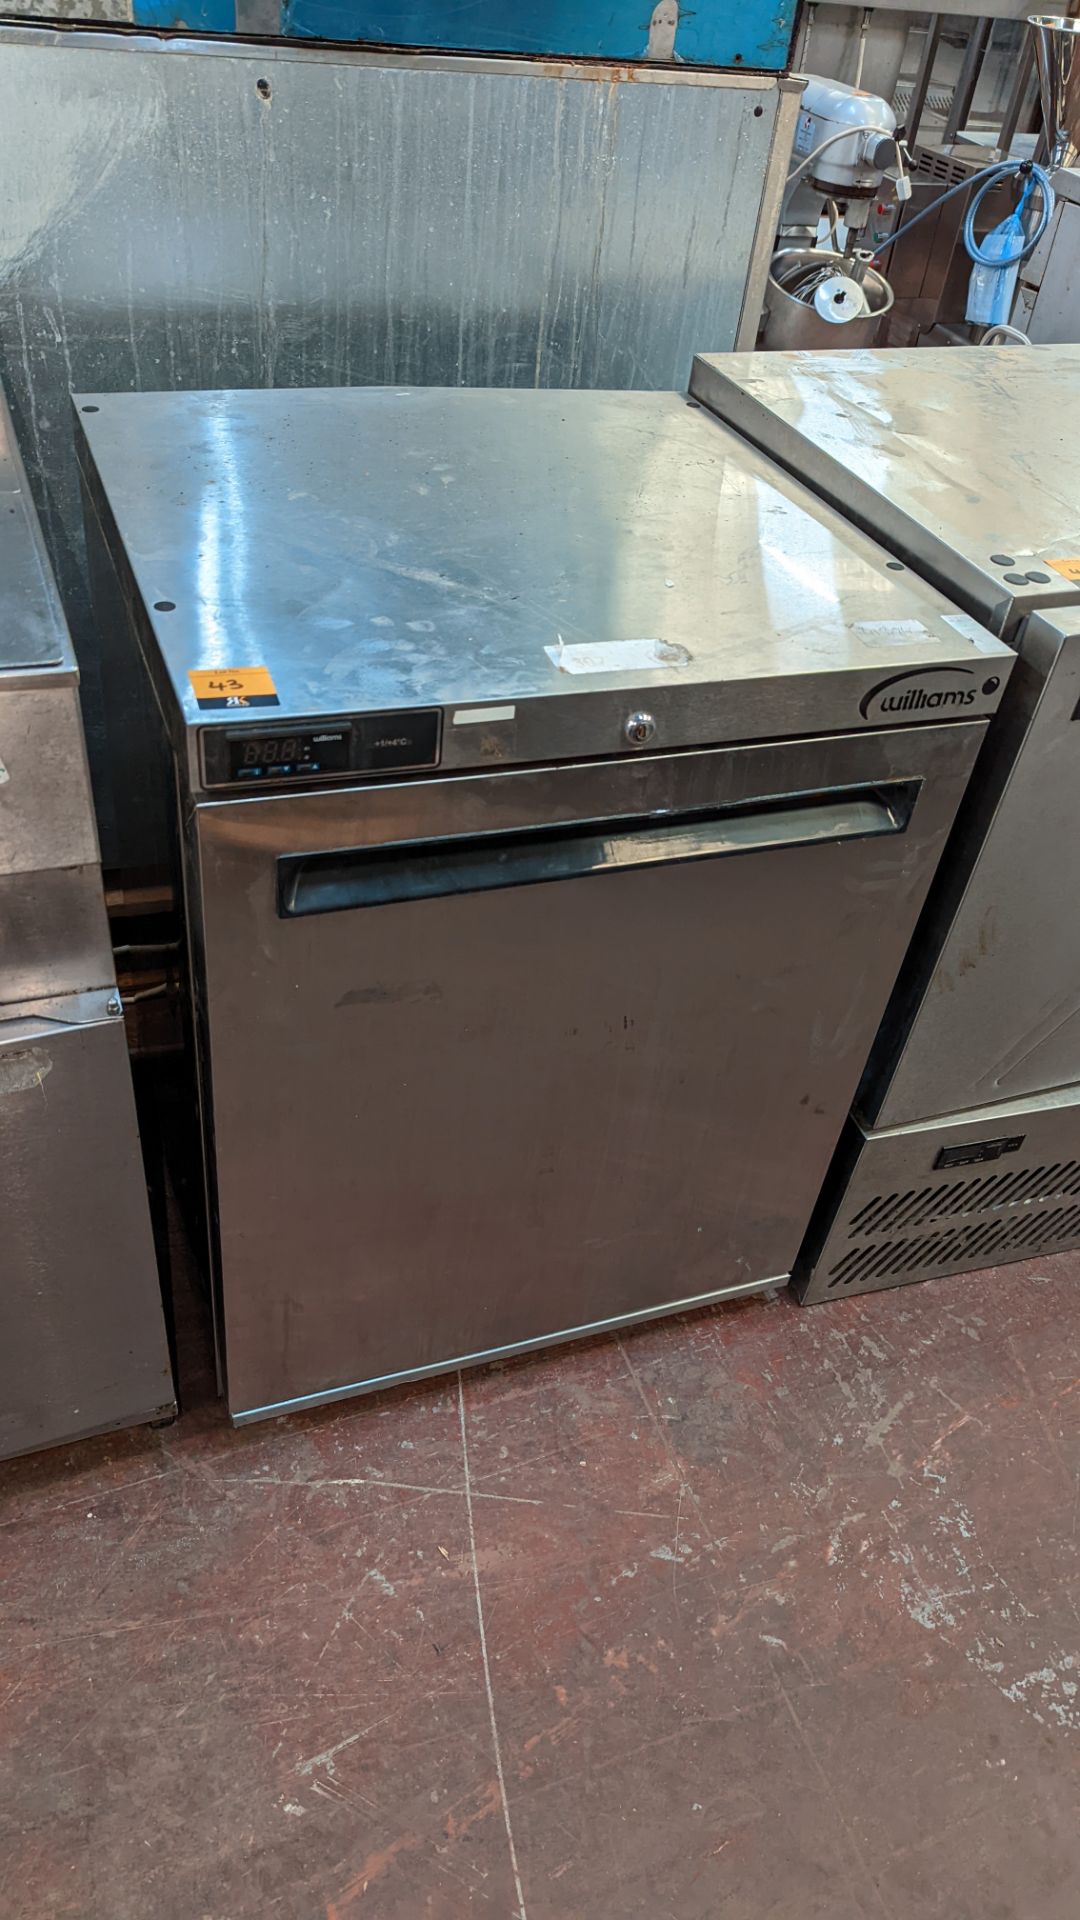 Williams stainless steel under counter commercial fridge